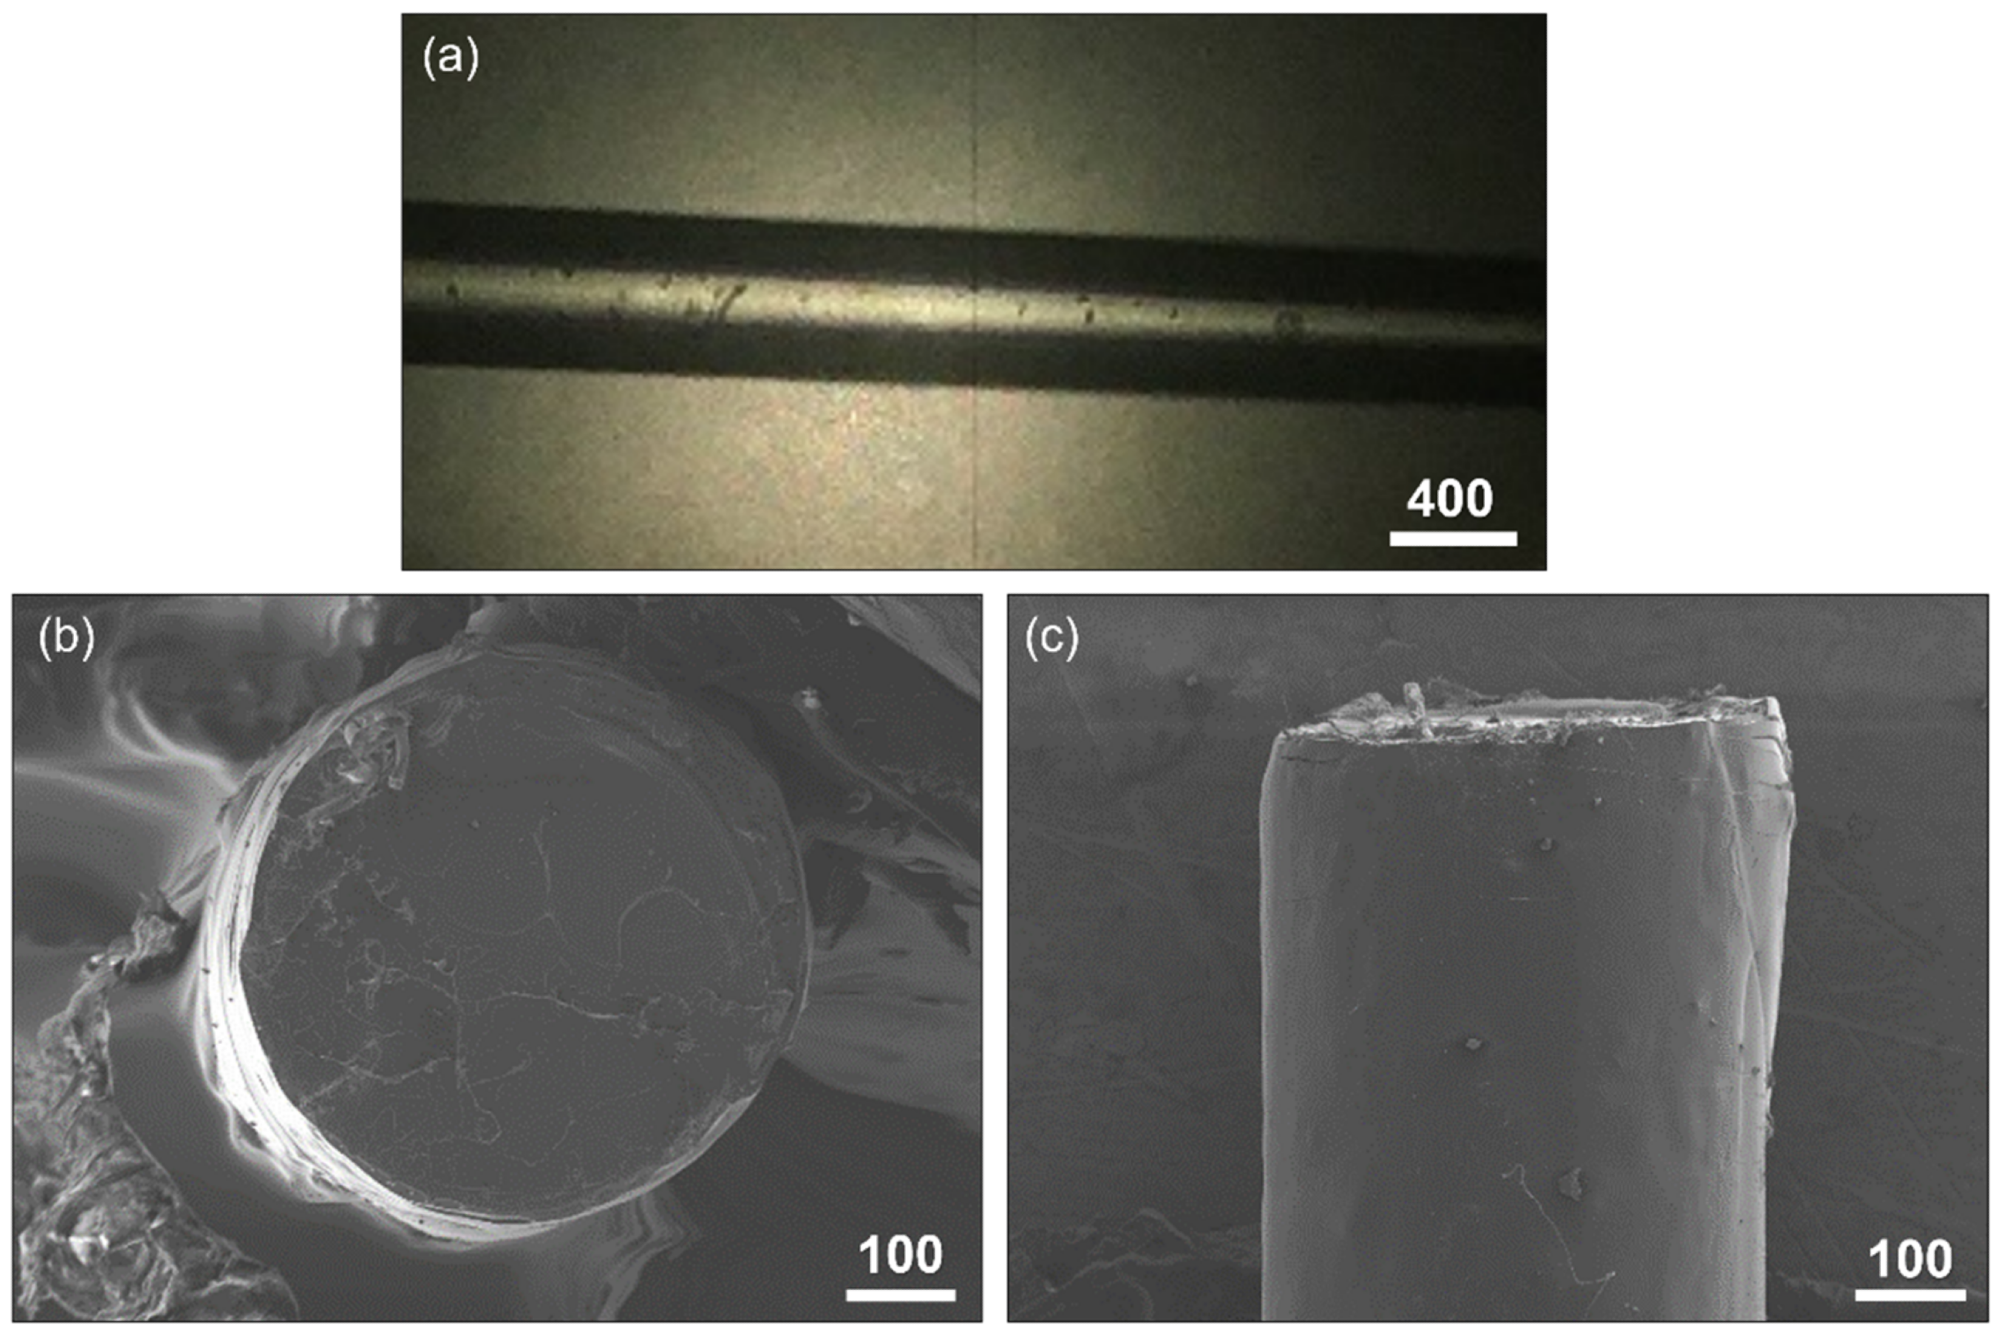 (a) Detail of the PLA filament with the profilometer. (b) Fractography of the filament with the SEM in which the excellent ovality can be observed. (c) Transversal view of the same broken filament. Scale bars in microns.